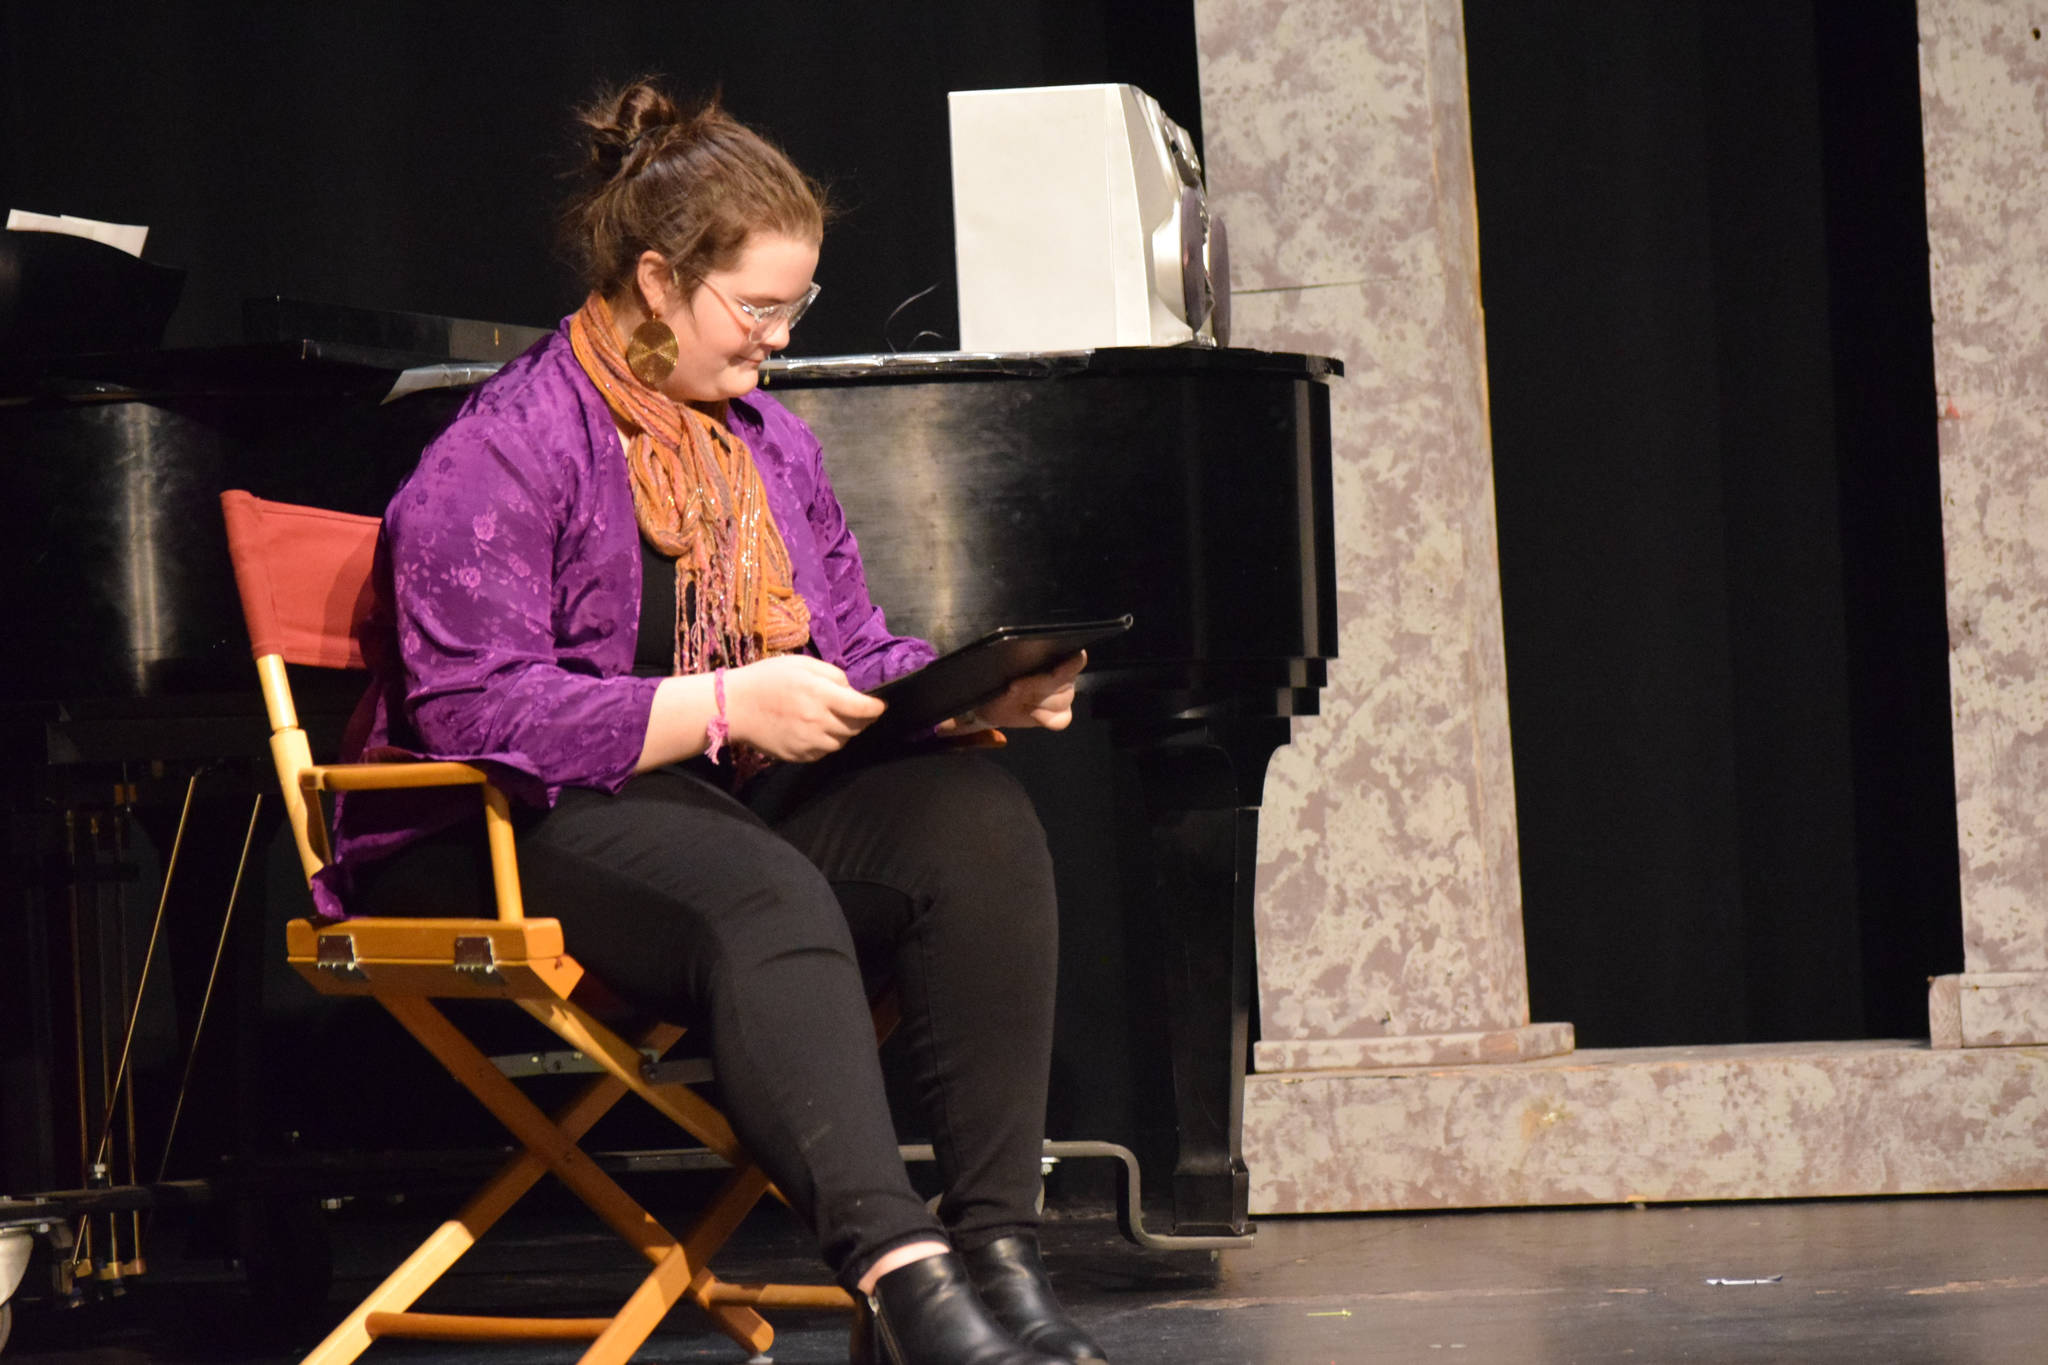 Jessica Perry acts onstage as her character Ms. Darbus in the Nikiski Middle/High School’s spring production of “High School Musical” in Nikiski, Alaska, on Wednesday May 5, 2021. (Camille Botello / Peninsula Clarion)